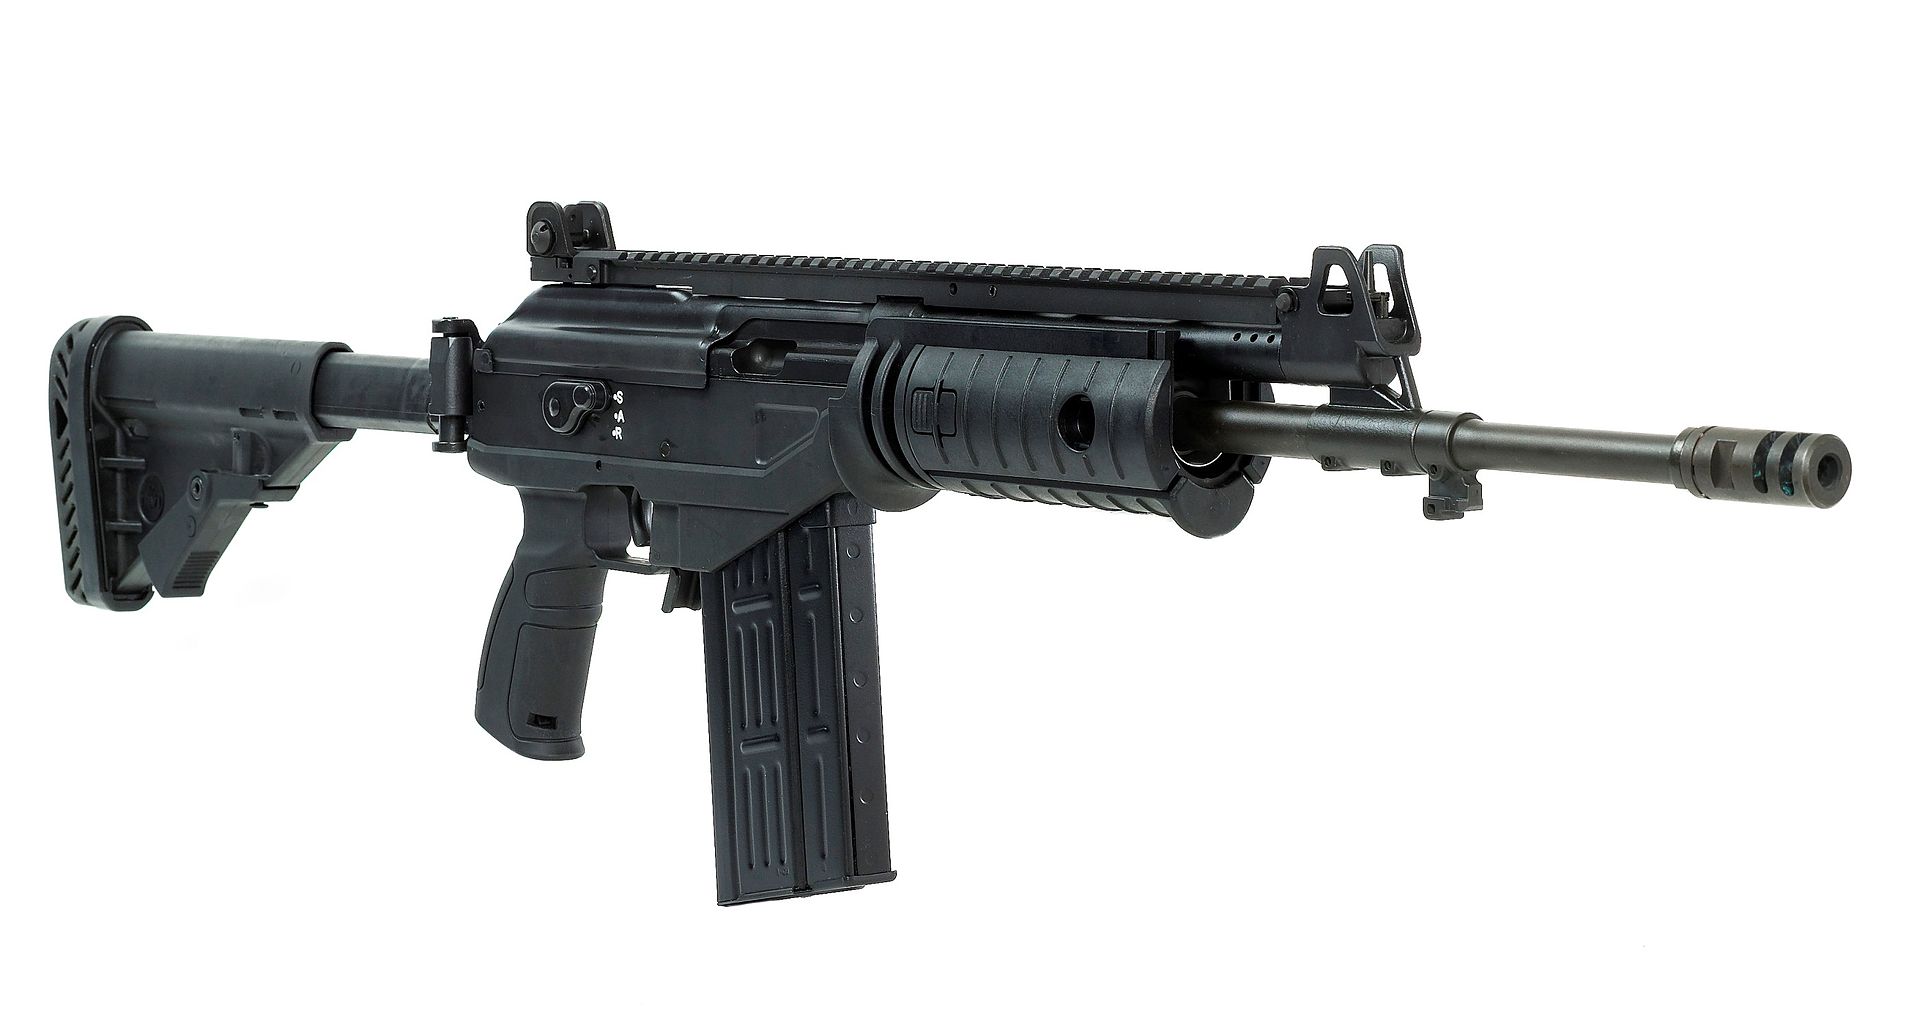            Galil Ace-52 .30Caliber(7.62x51mm) Israel    
The Ace 52 and Ace 53 assault rifles offer the ultimate solution comprising a modern and reliable weapon with a 7.62x51mm caliber, suitable for long range targets, open and urban areas